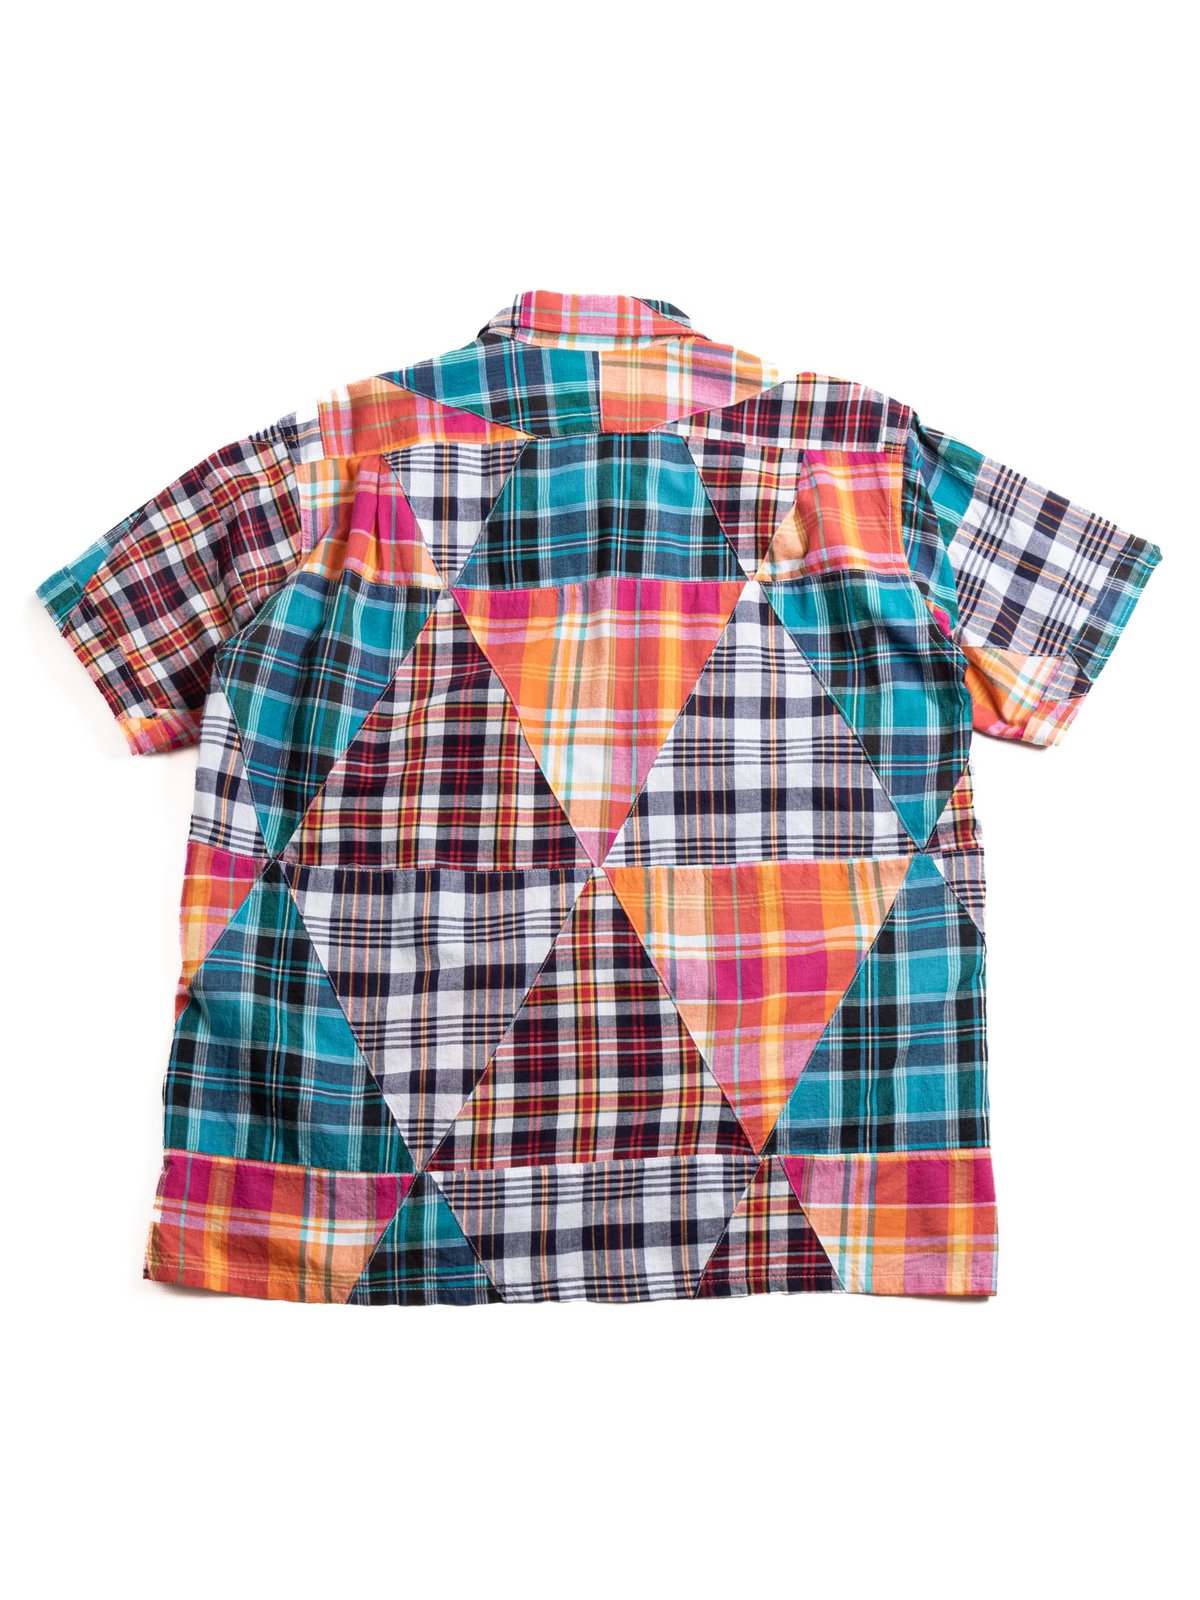 CAMP SHIRT MULTI COLOR TRIANGLE PATCHWORK - Image 4